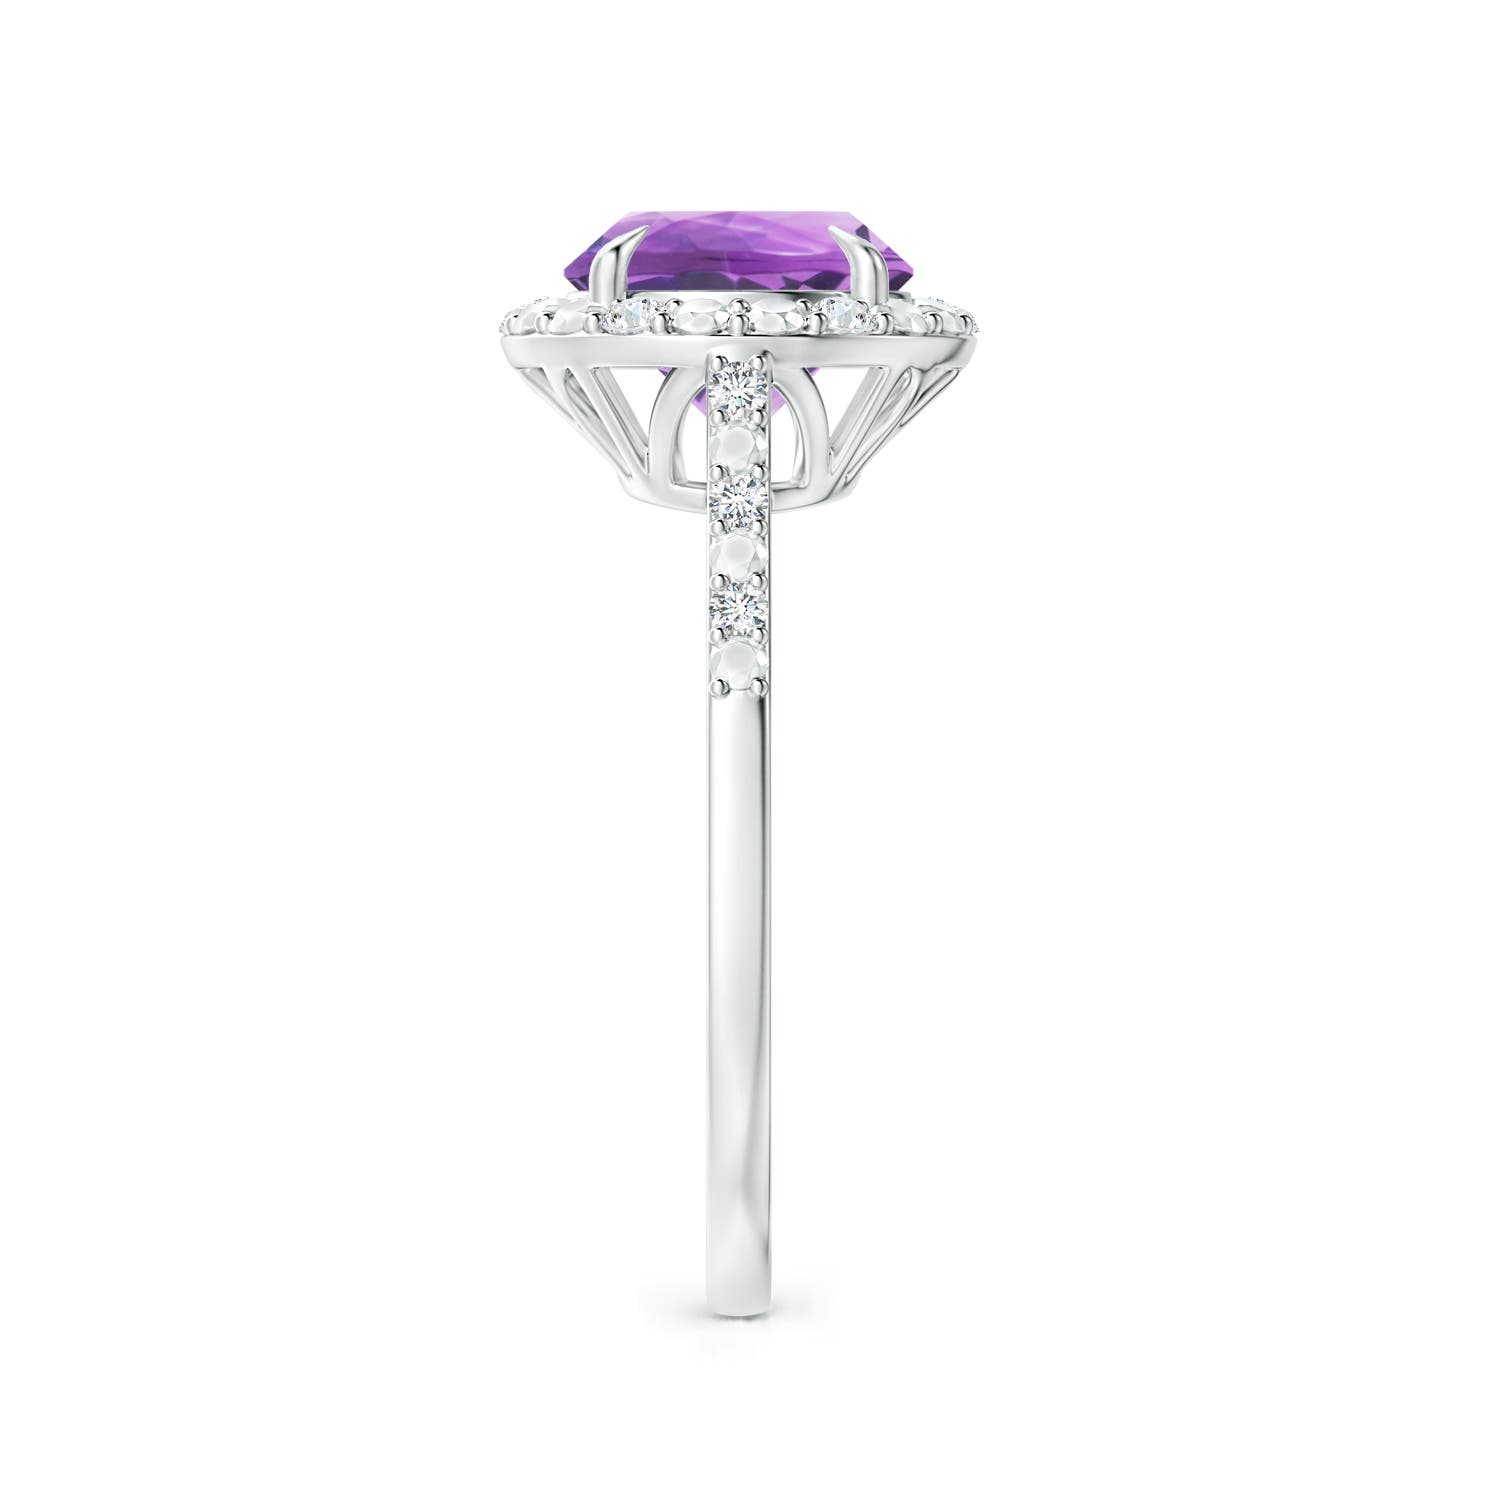 A - Amethyst / 1.82 CT / 14 KT White Gold